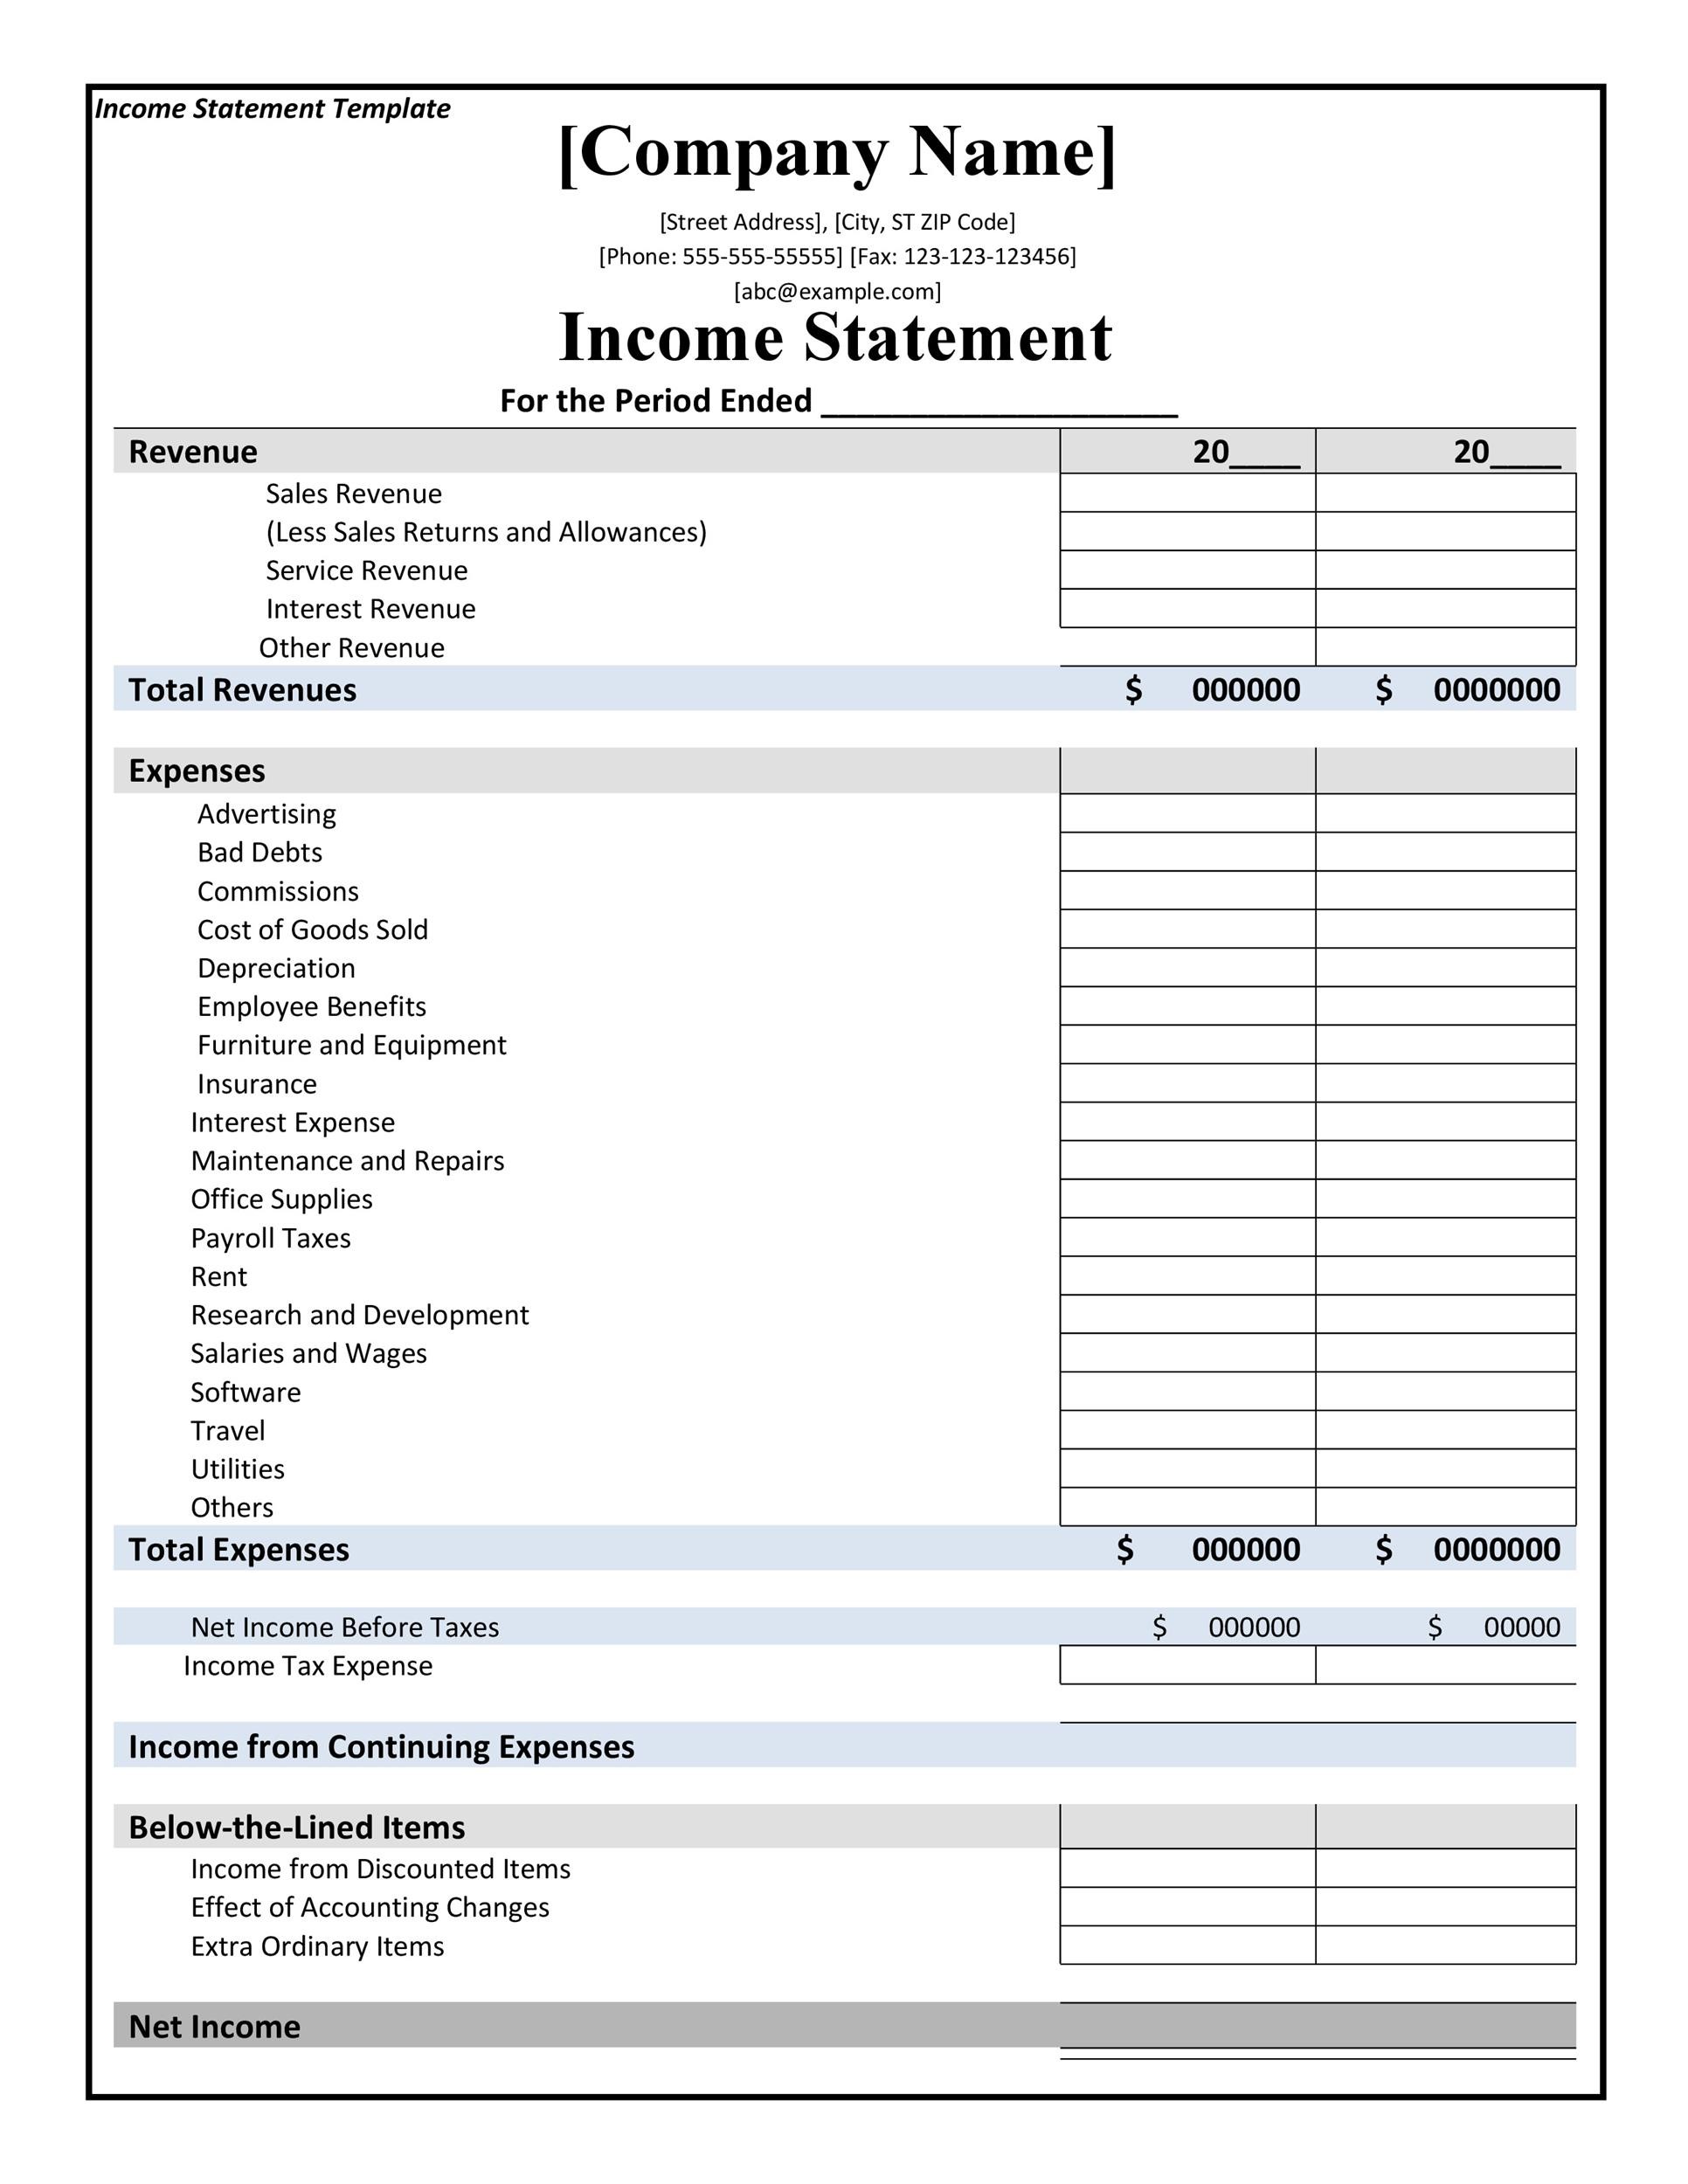 41-free-income-statement-templates-examples-templatelab